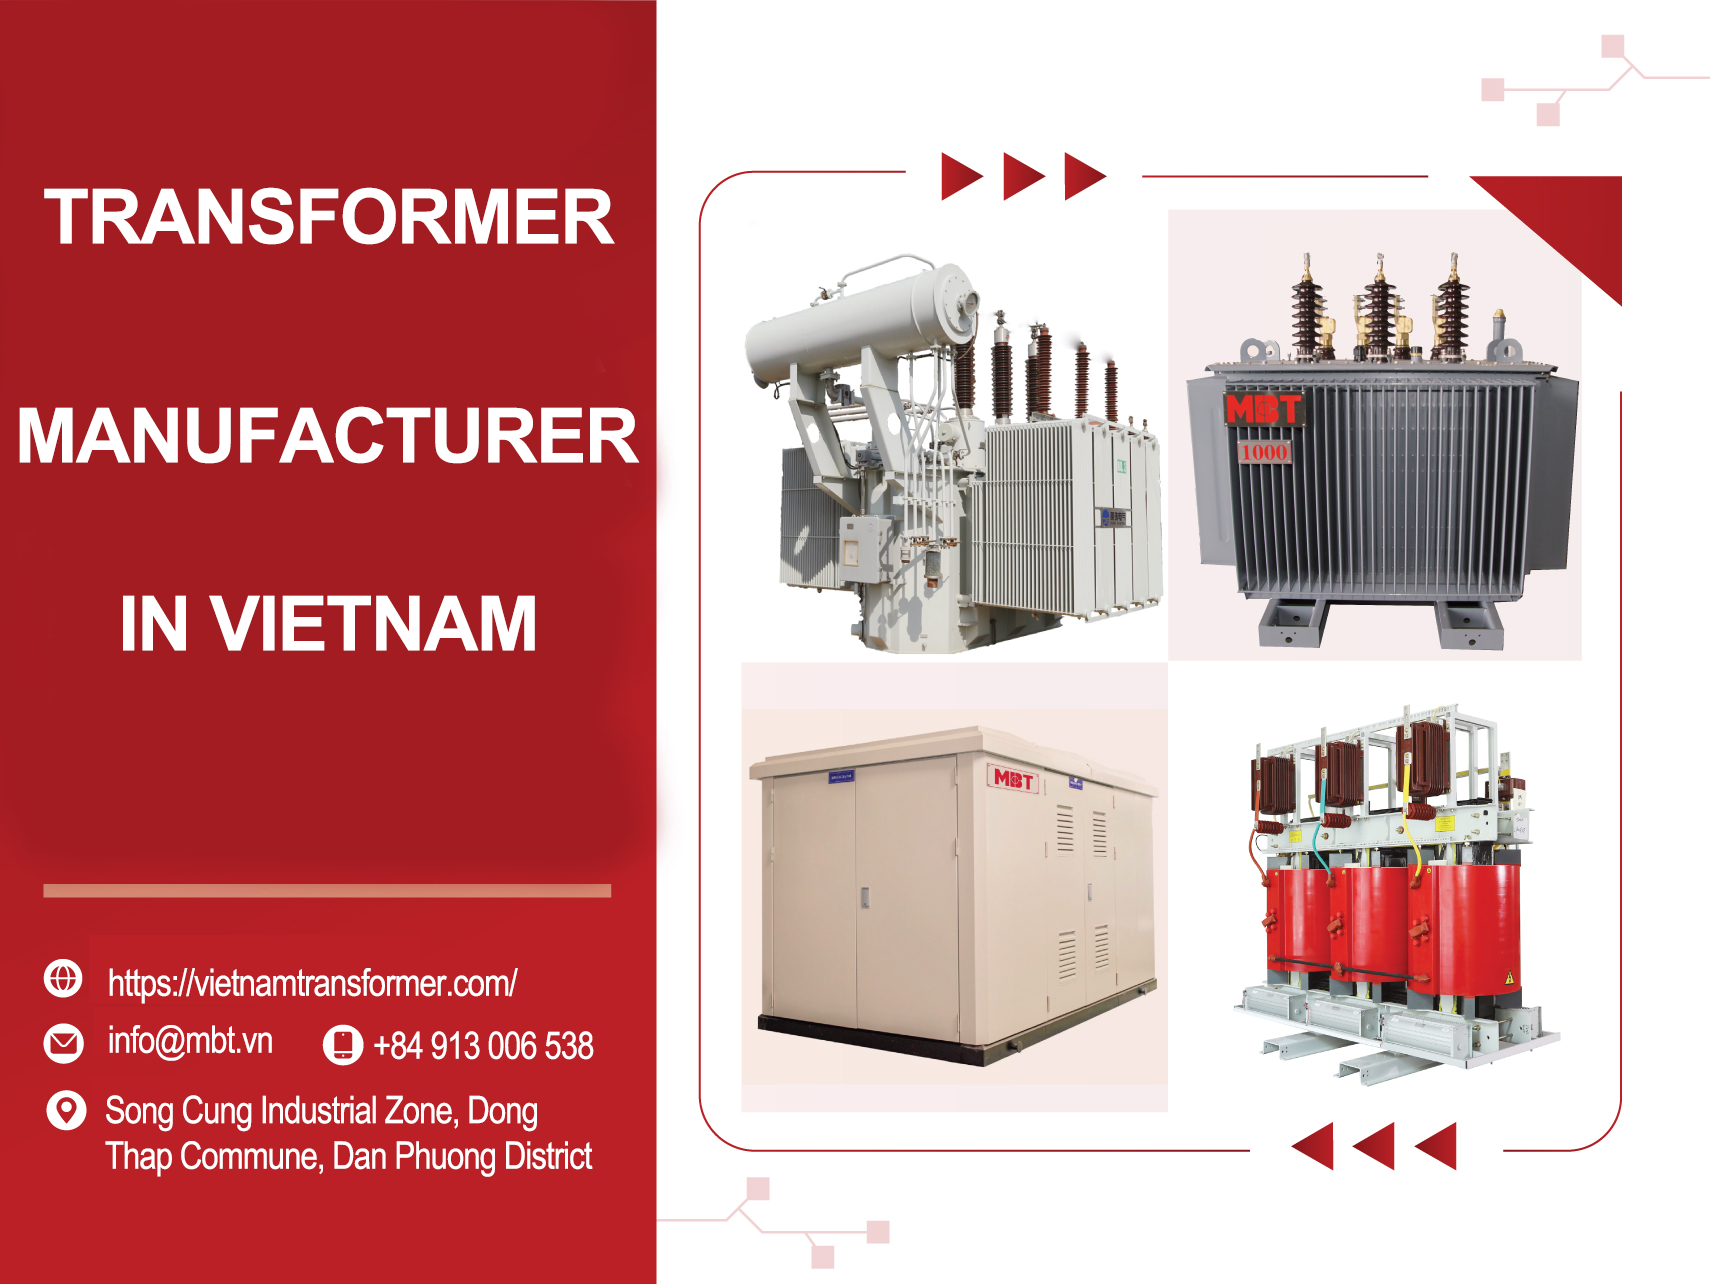 The reliable transformer manufacturer